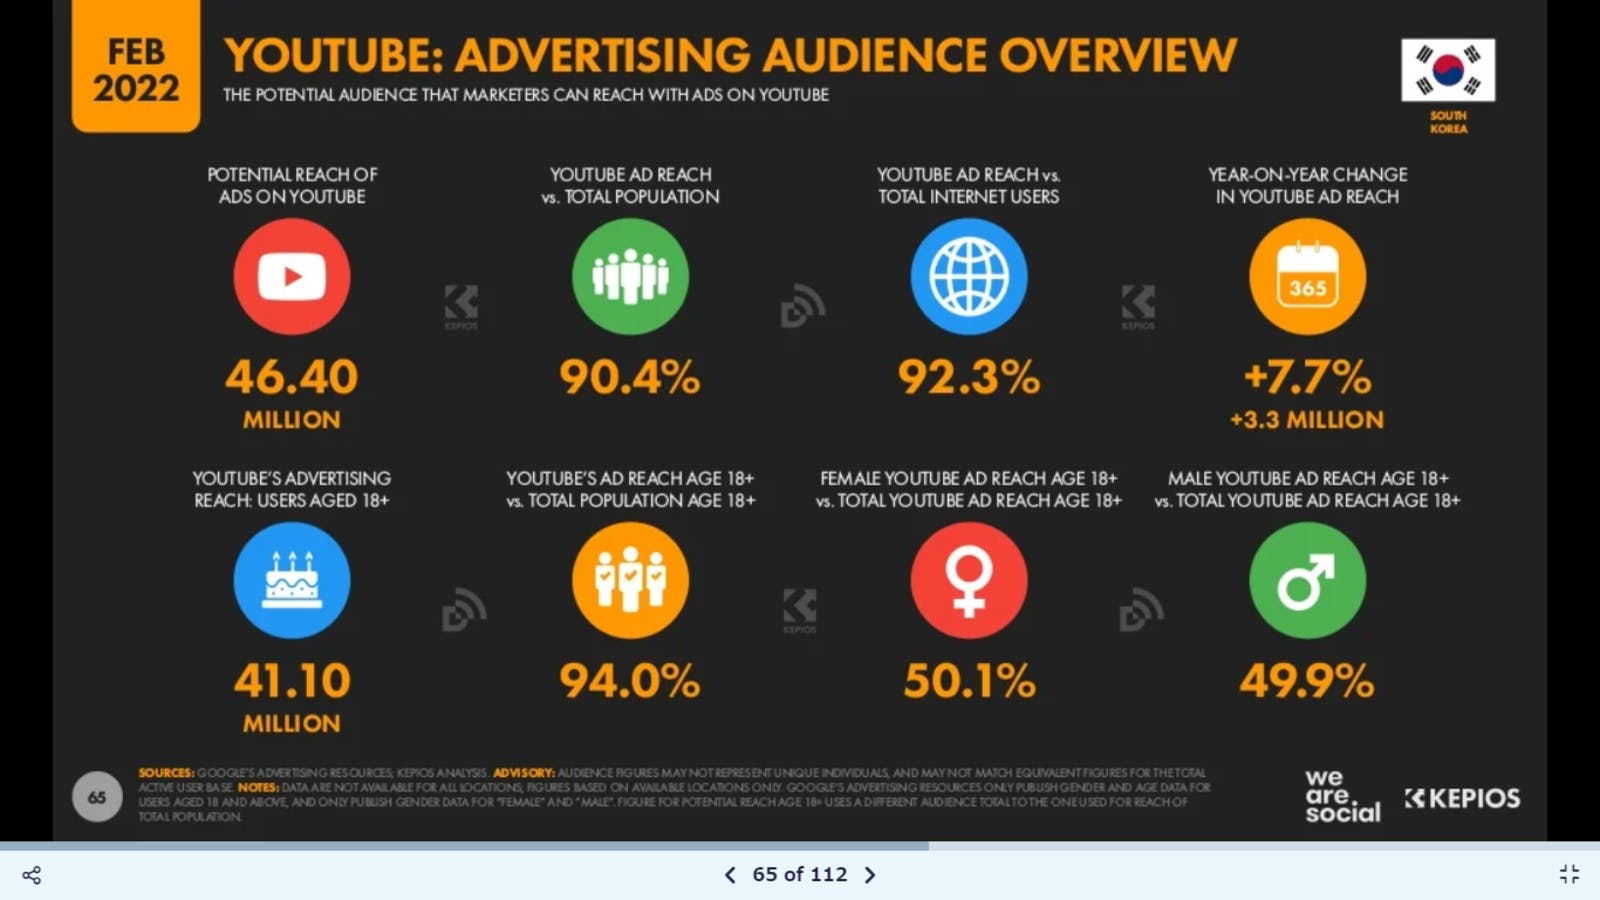 youtube advertising audience overview Datereportal